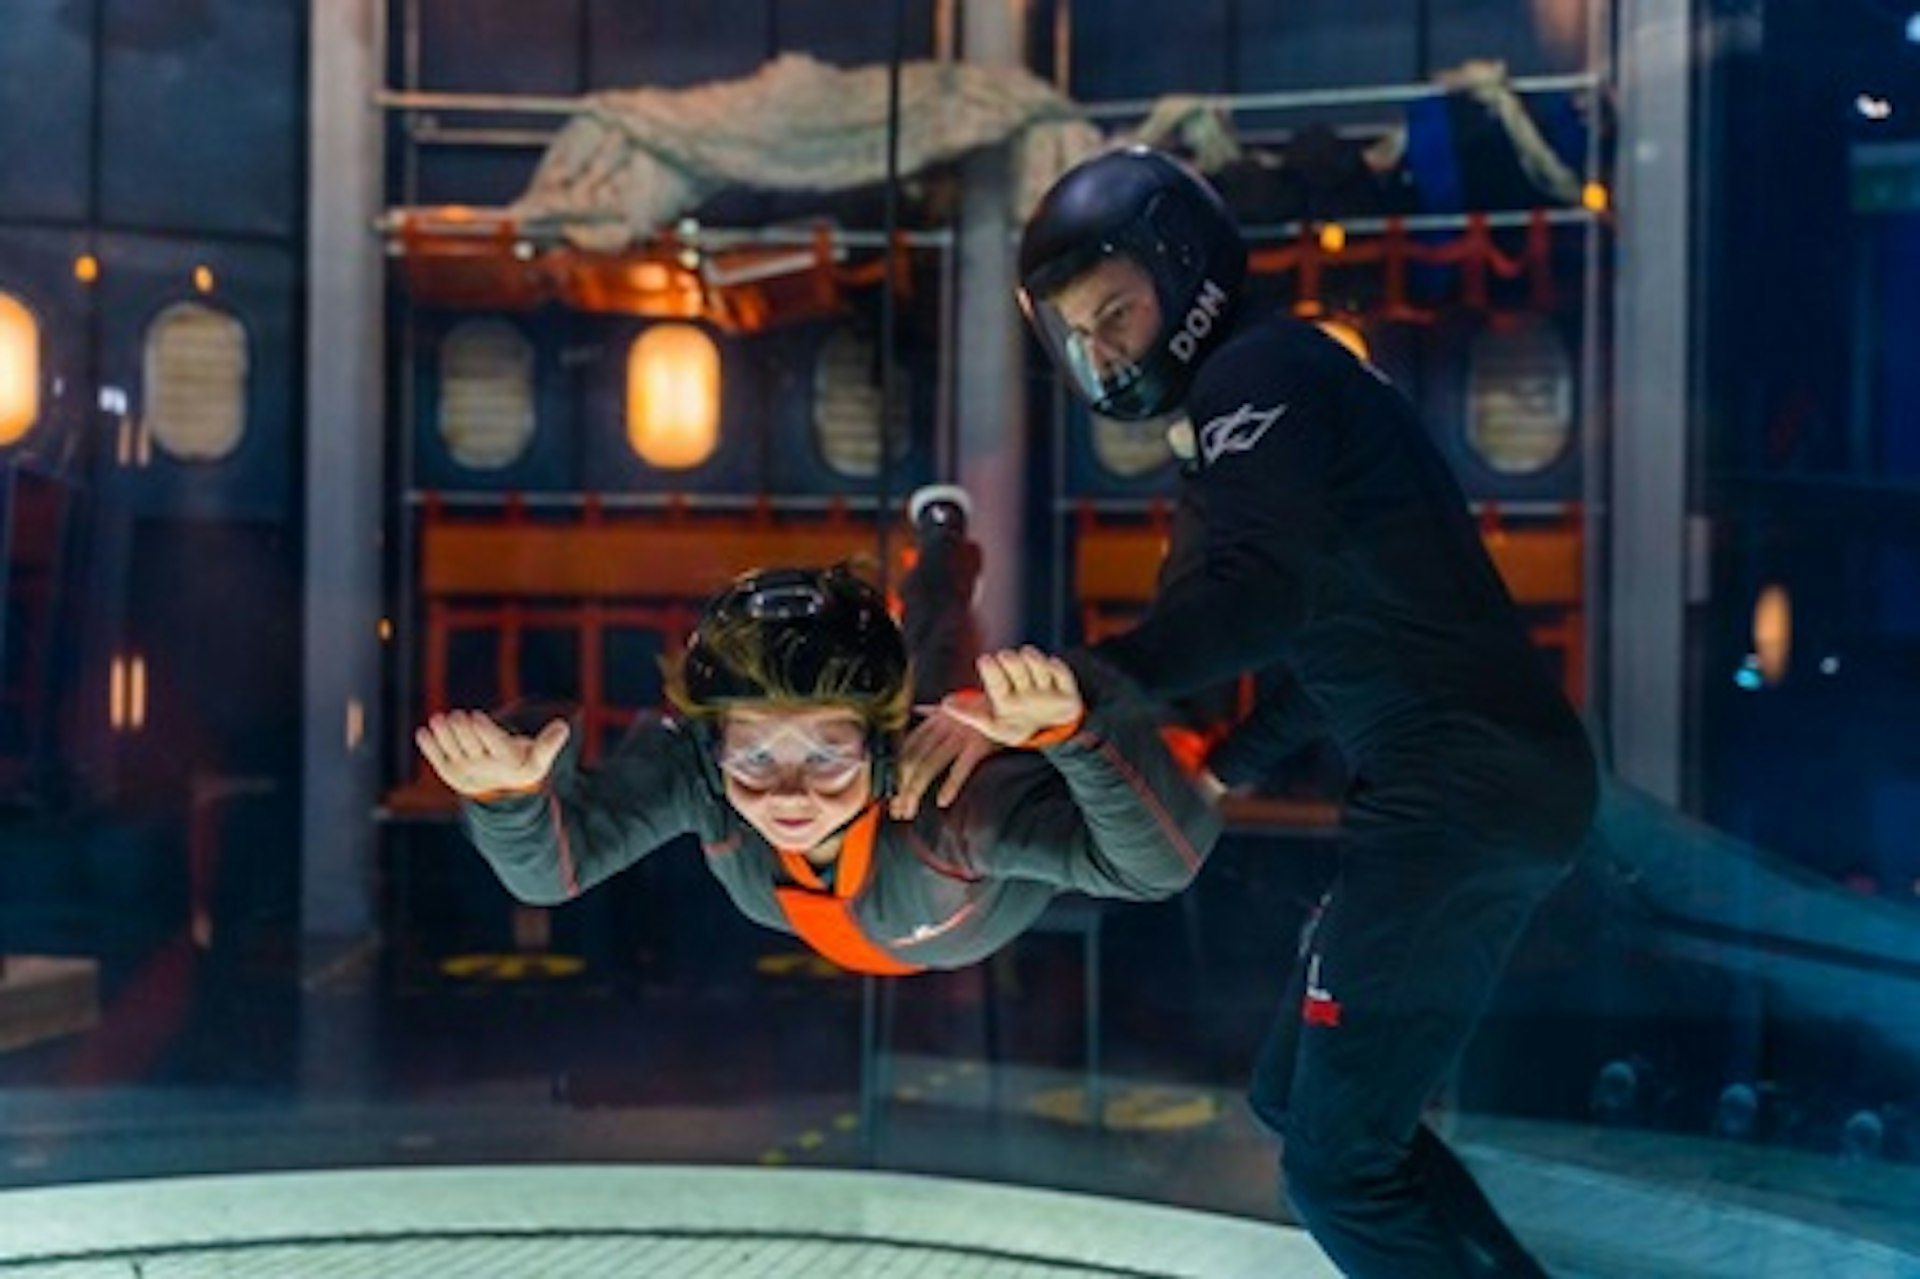 iFly Indoor Skydiving and Archery for Two at The Bear Grylls Adventure 3